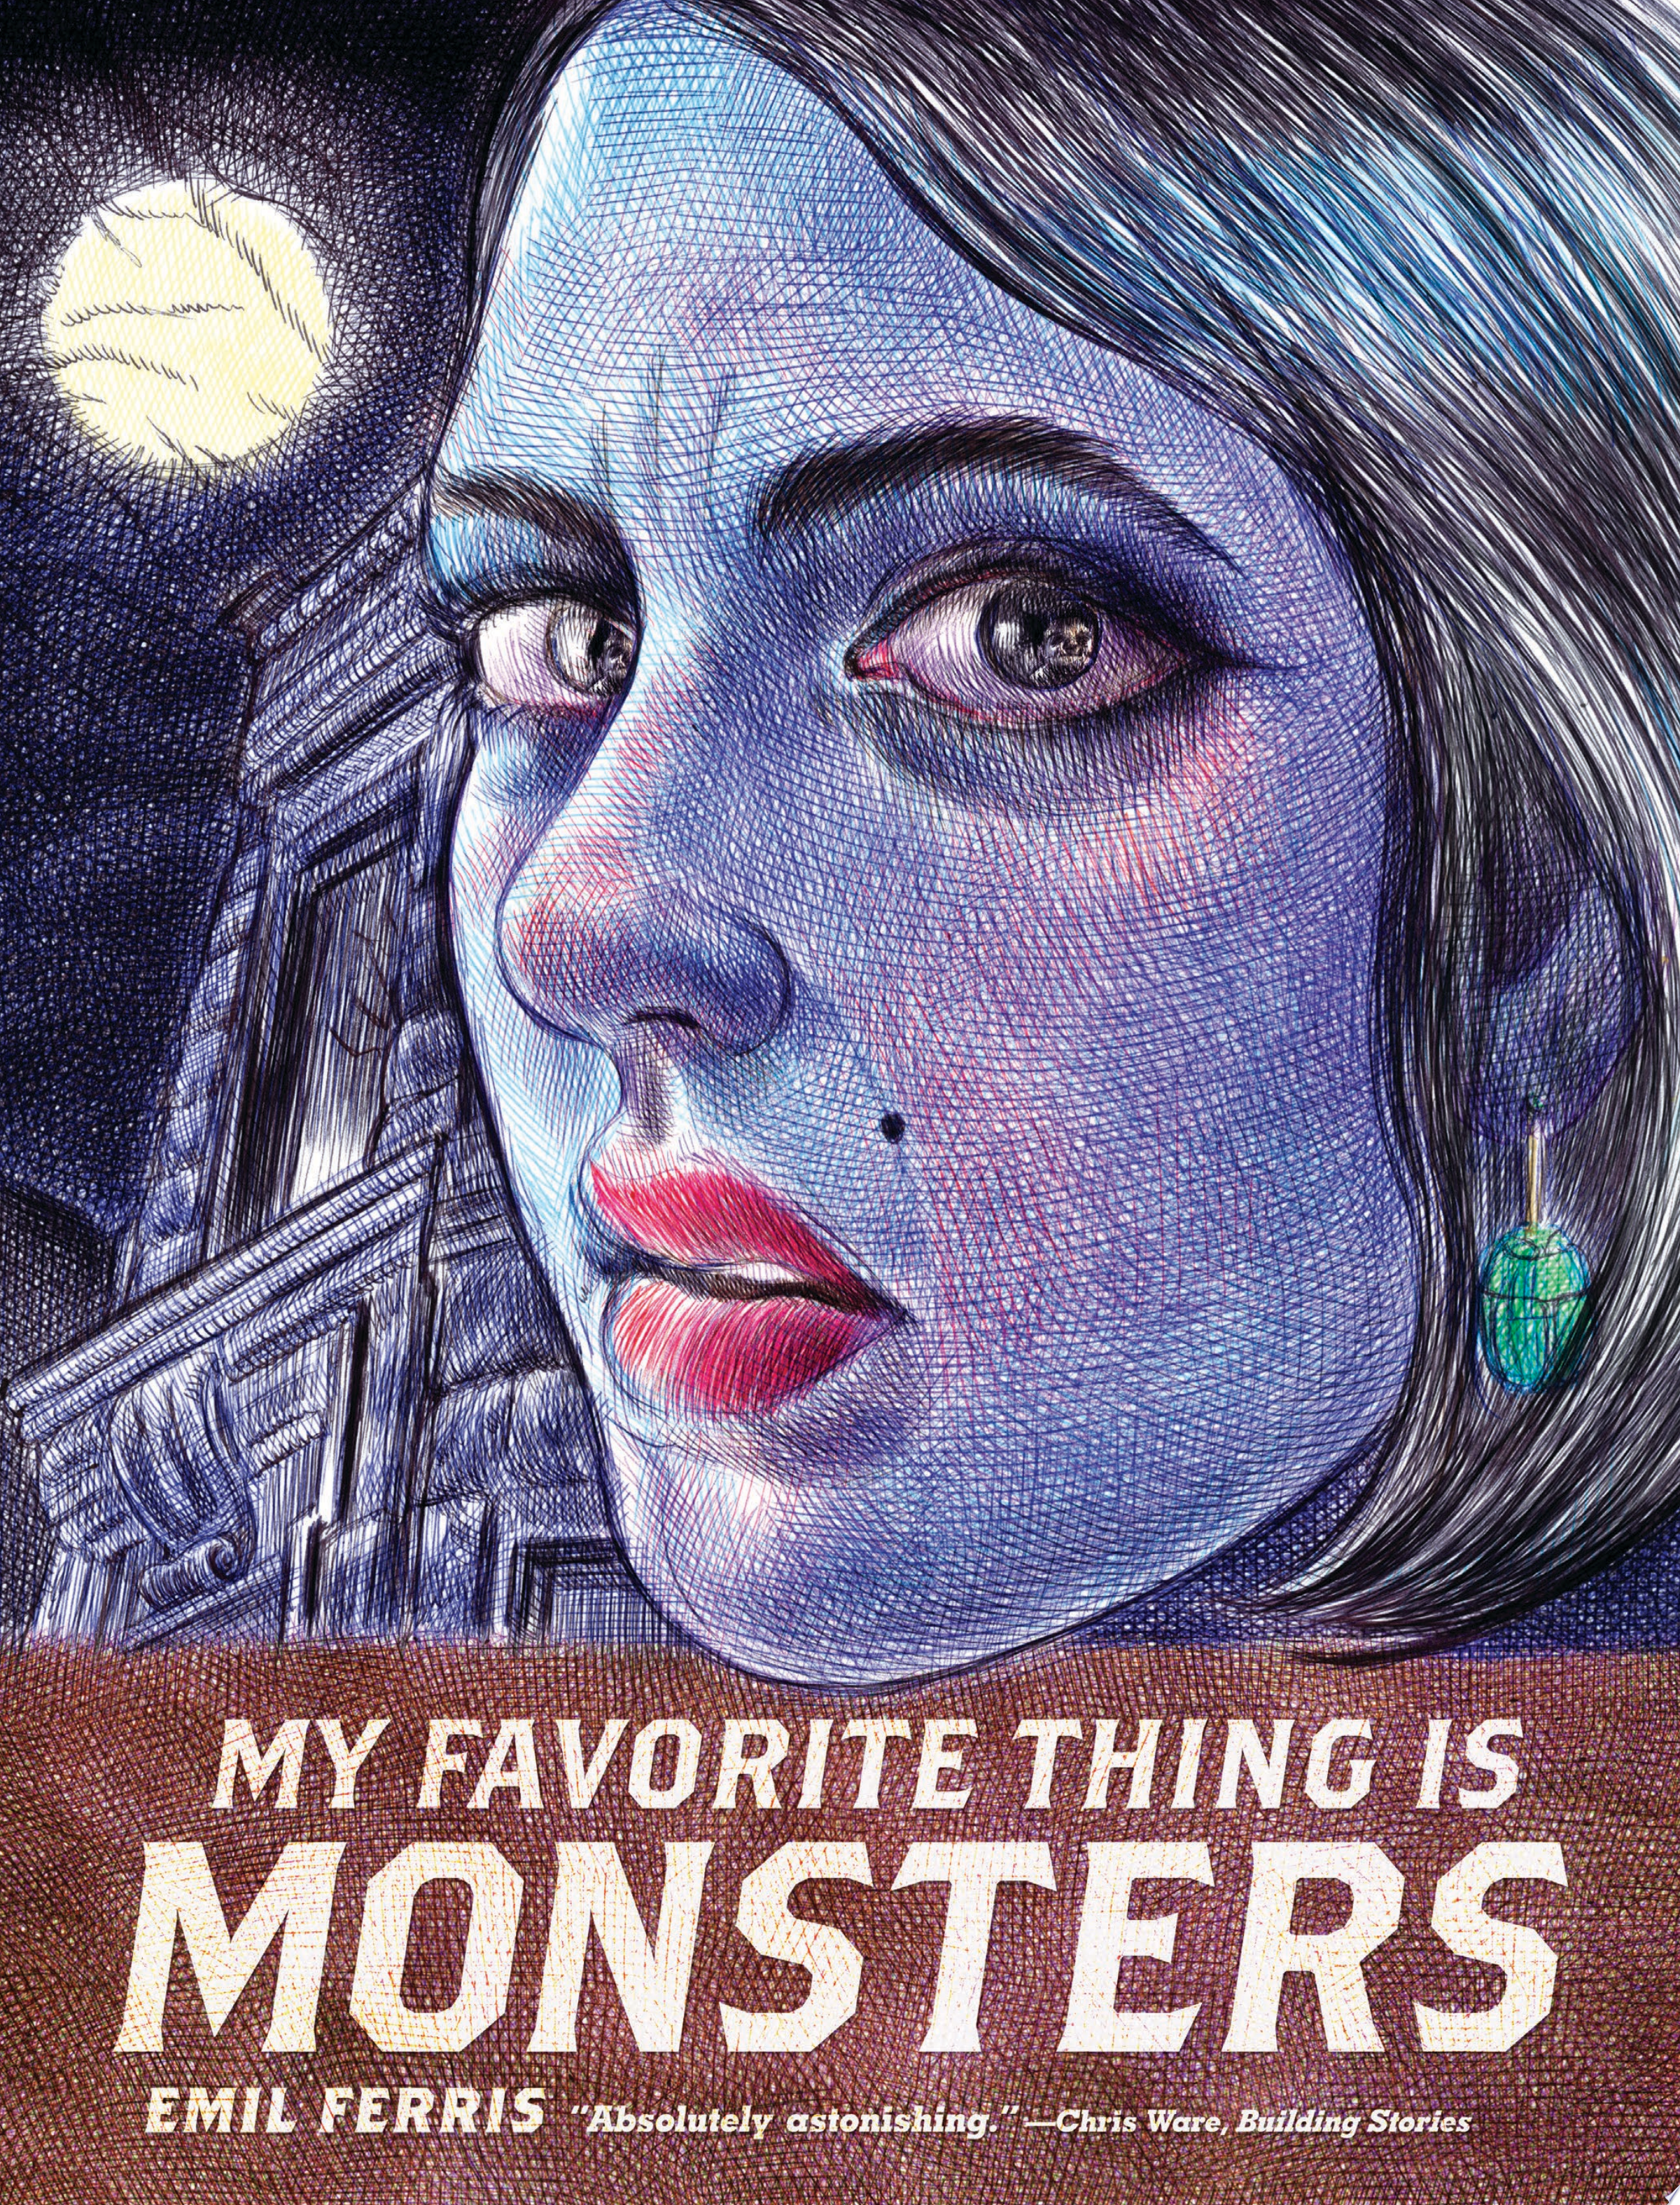 Image for "My Favorite Thing is Monsters"